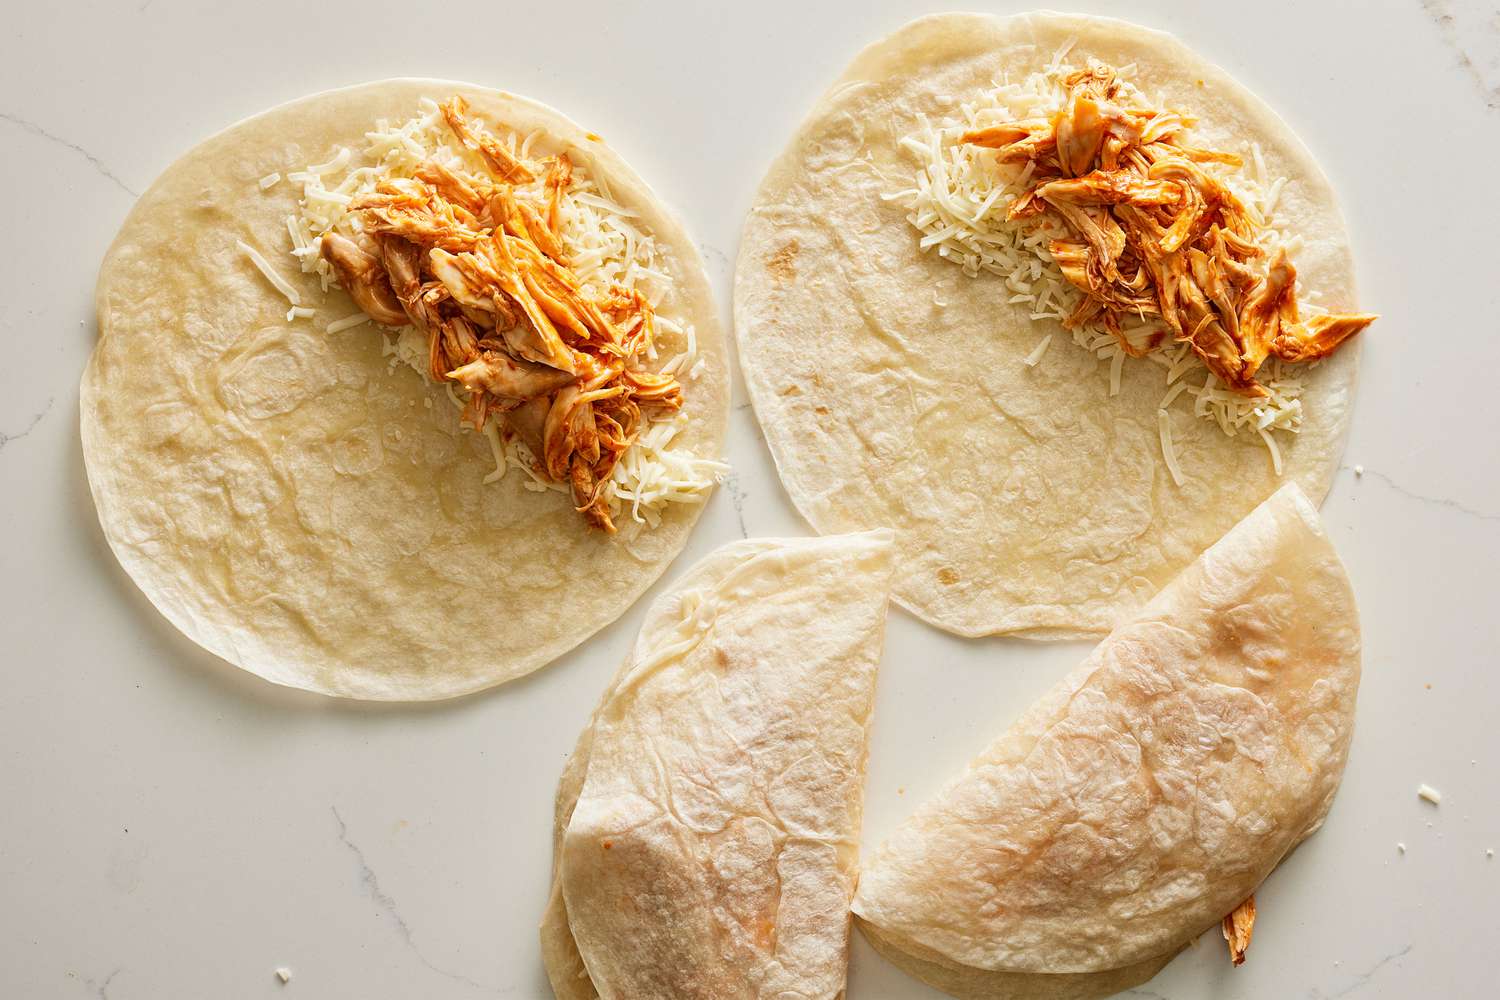 Two tortillas with shredded chicken over shredded cheese, and two folded quesadillas